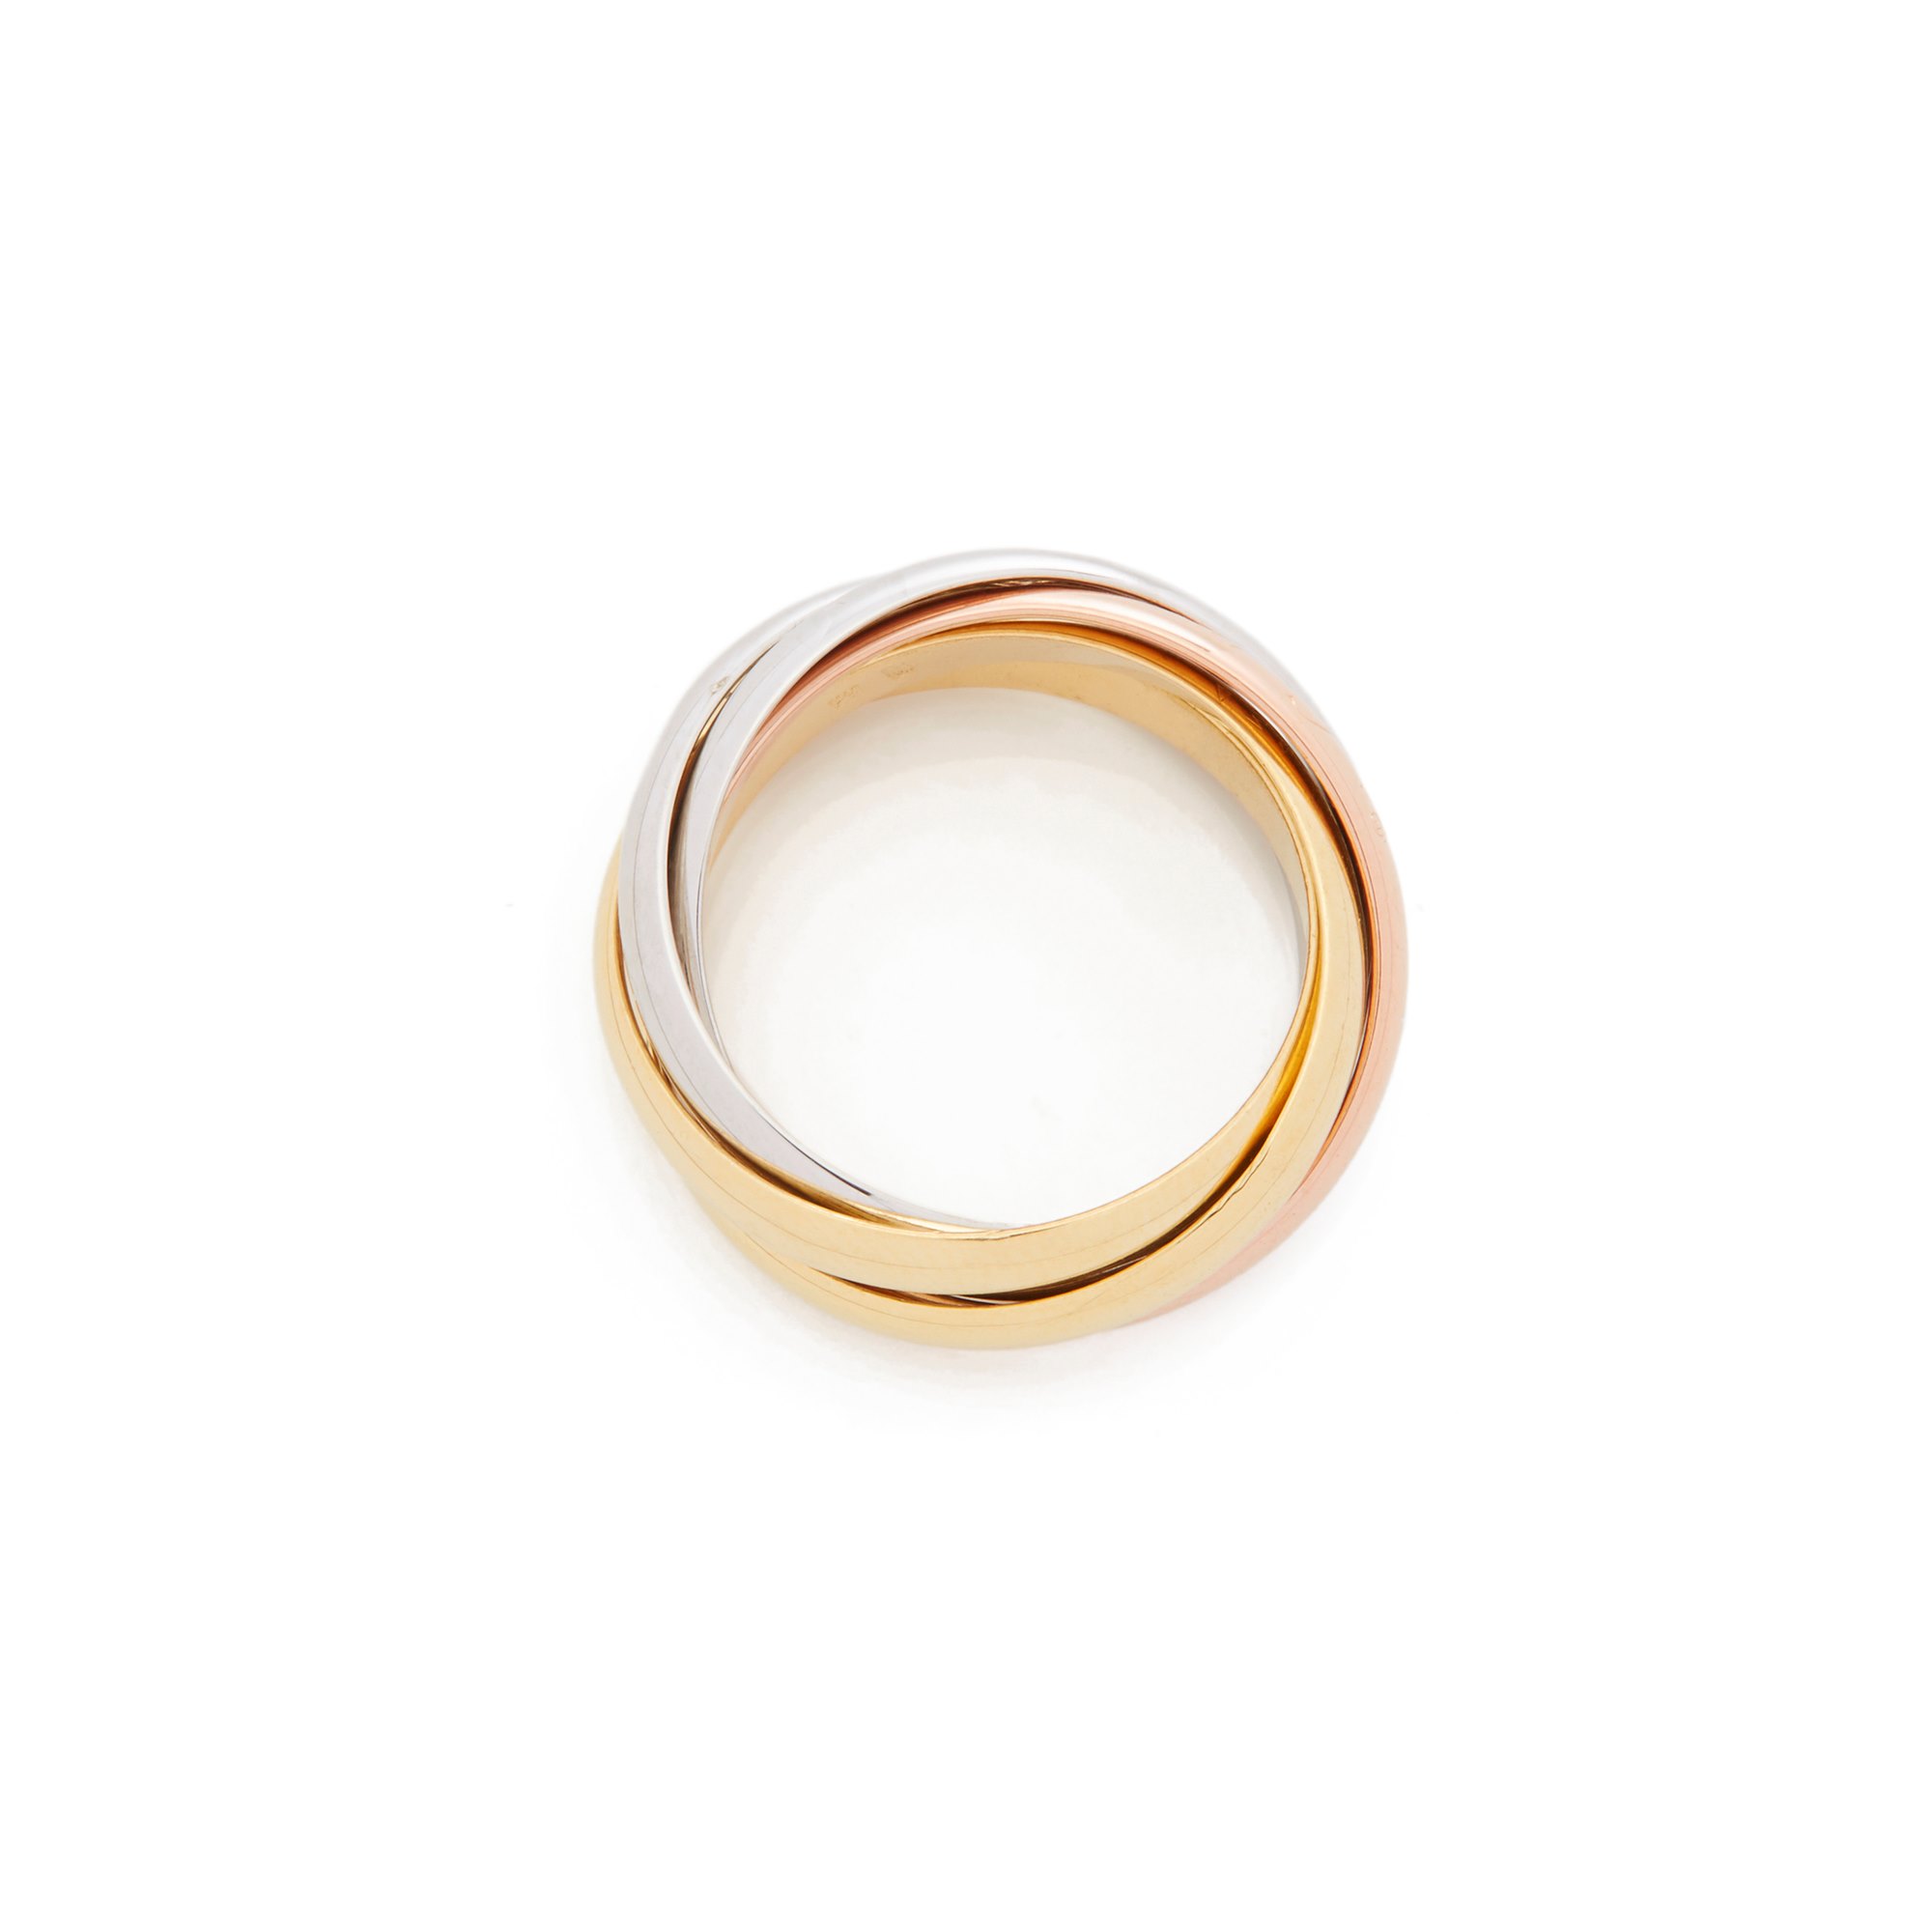 Cartier 18k Yellow, White & Rose Gold Five Band Trinity Ring